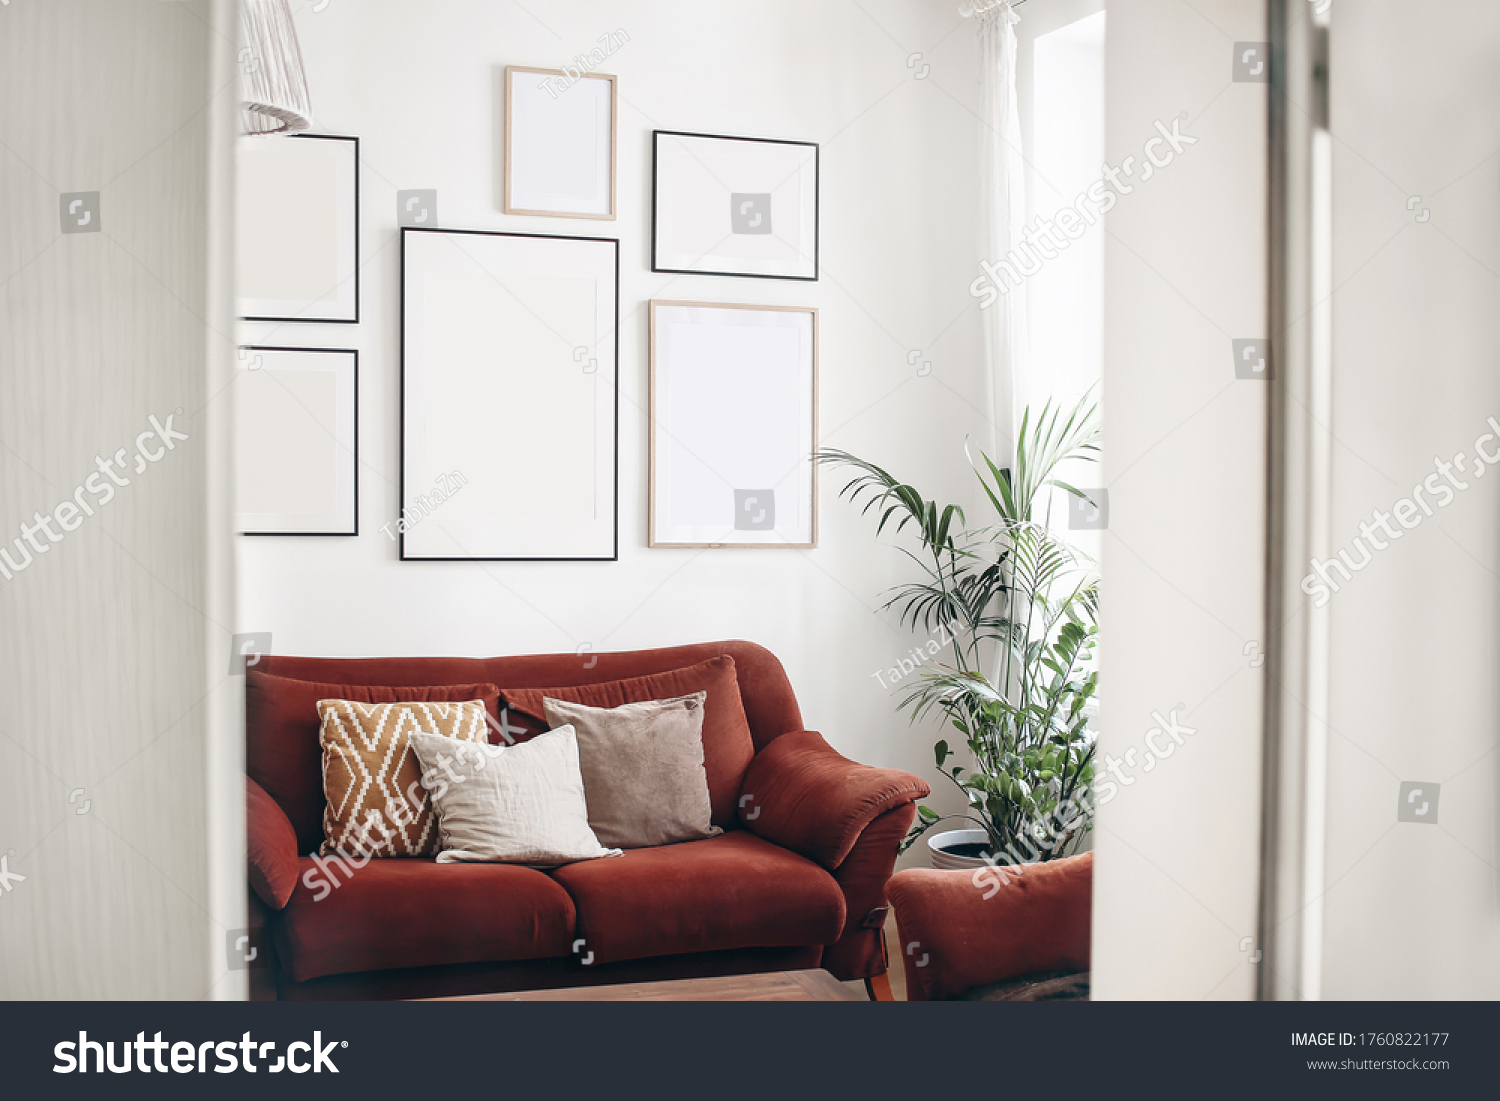 Blank picture frames mockups on white wall. White living room design. View of  modern boho, scandi style interior with sofa, cushions, potted palm plant through open white door. Home staging concept. #1760822177